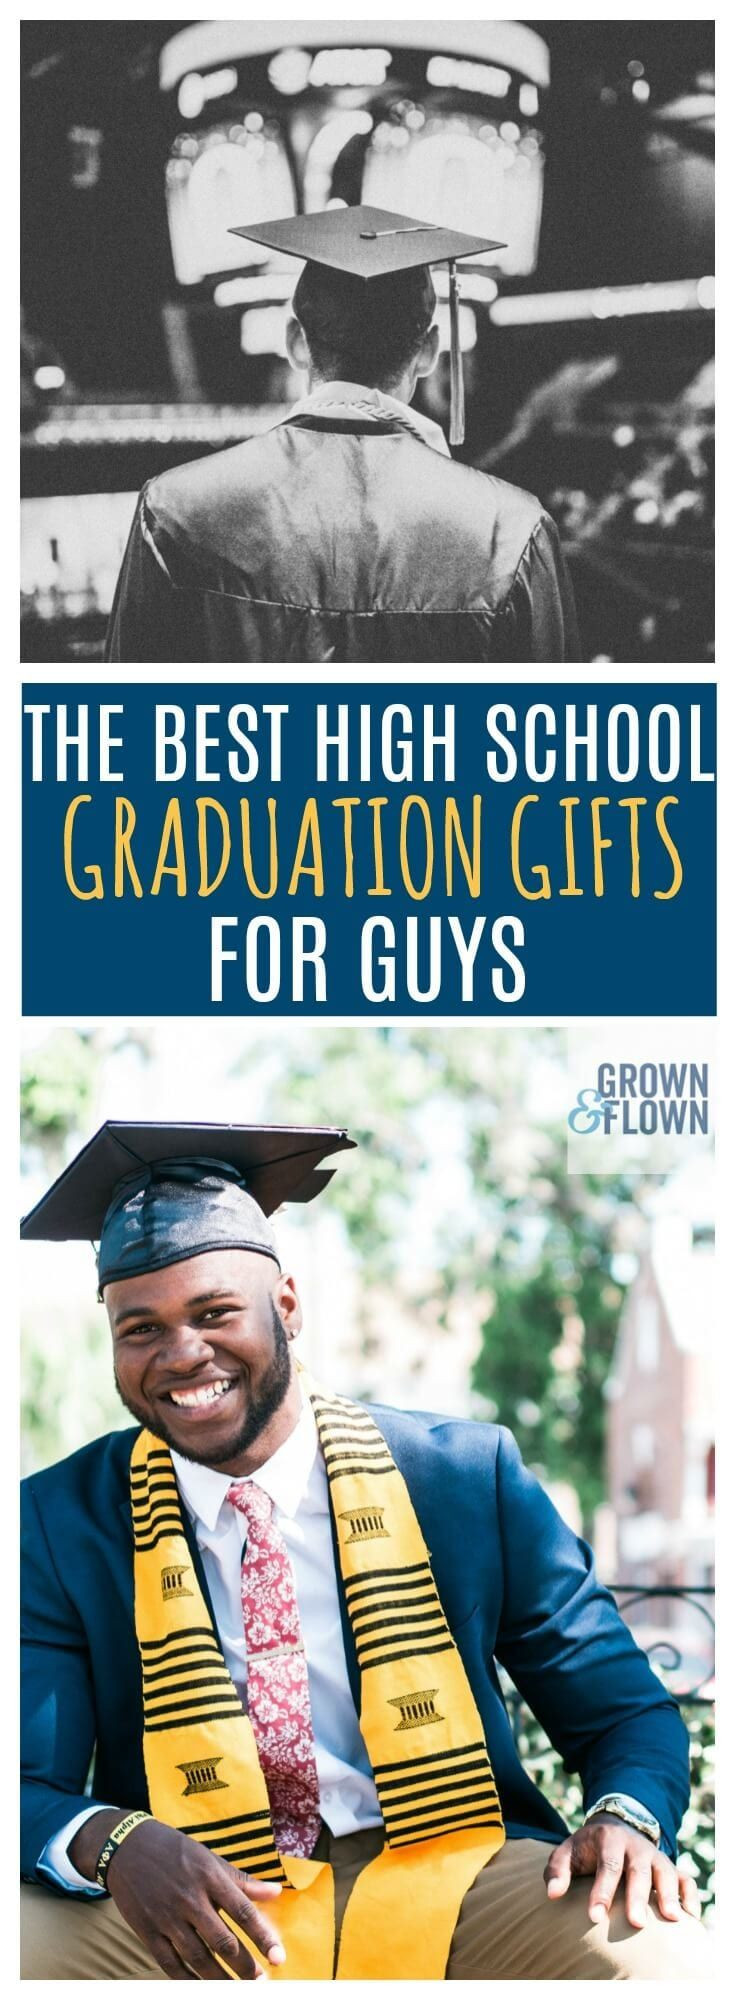 Top Graduation Gift Ideas For Senior Graduates
 2020 High School Graduation Gifts for Guys They Will Love